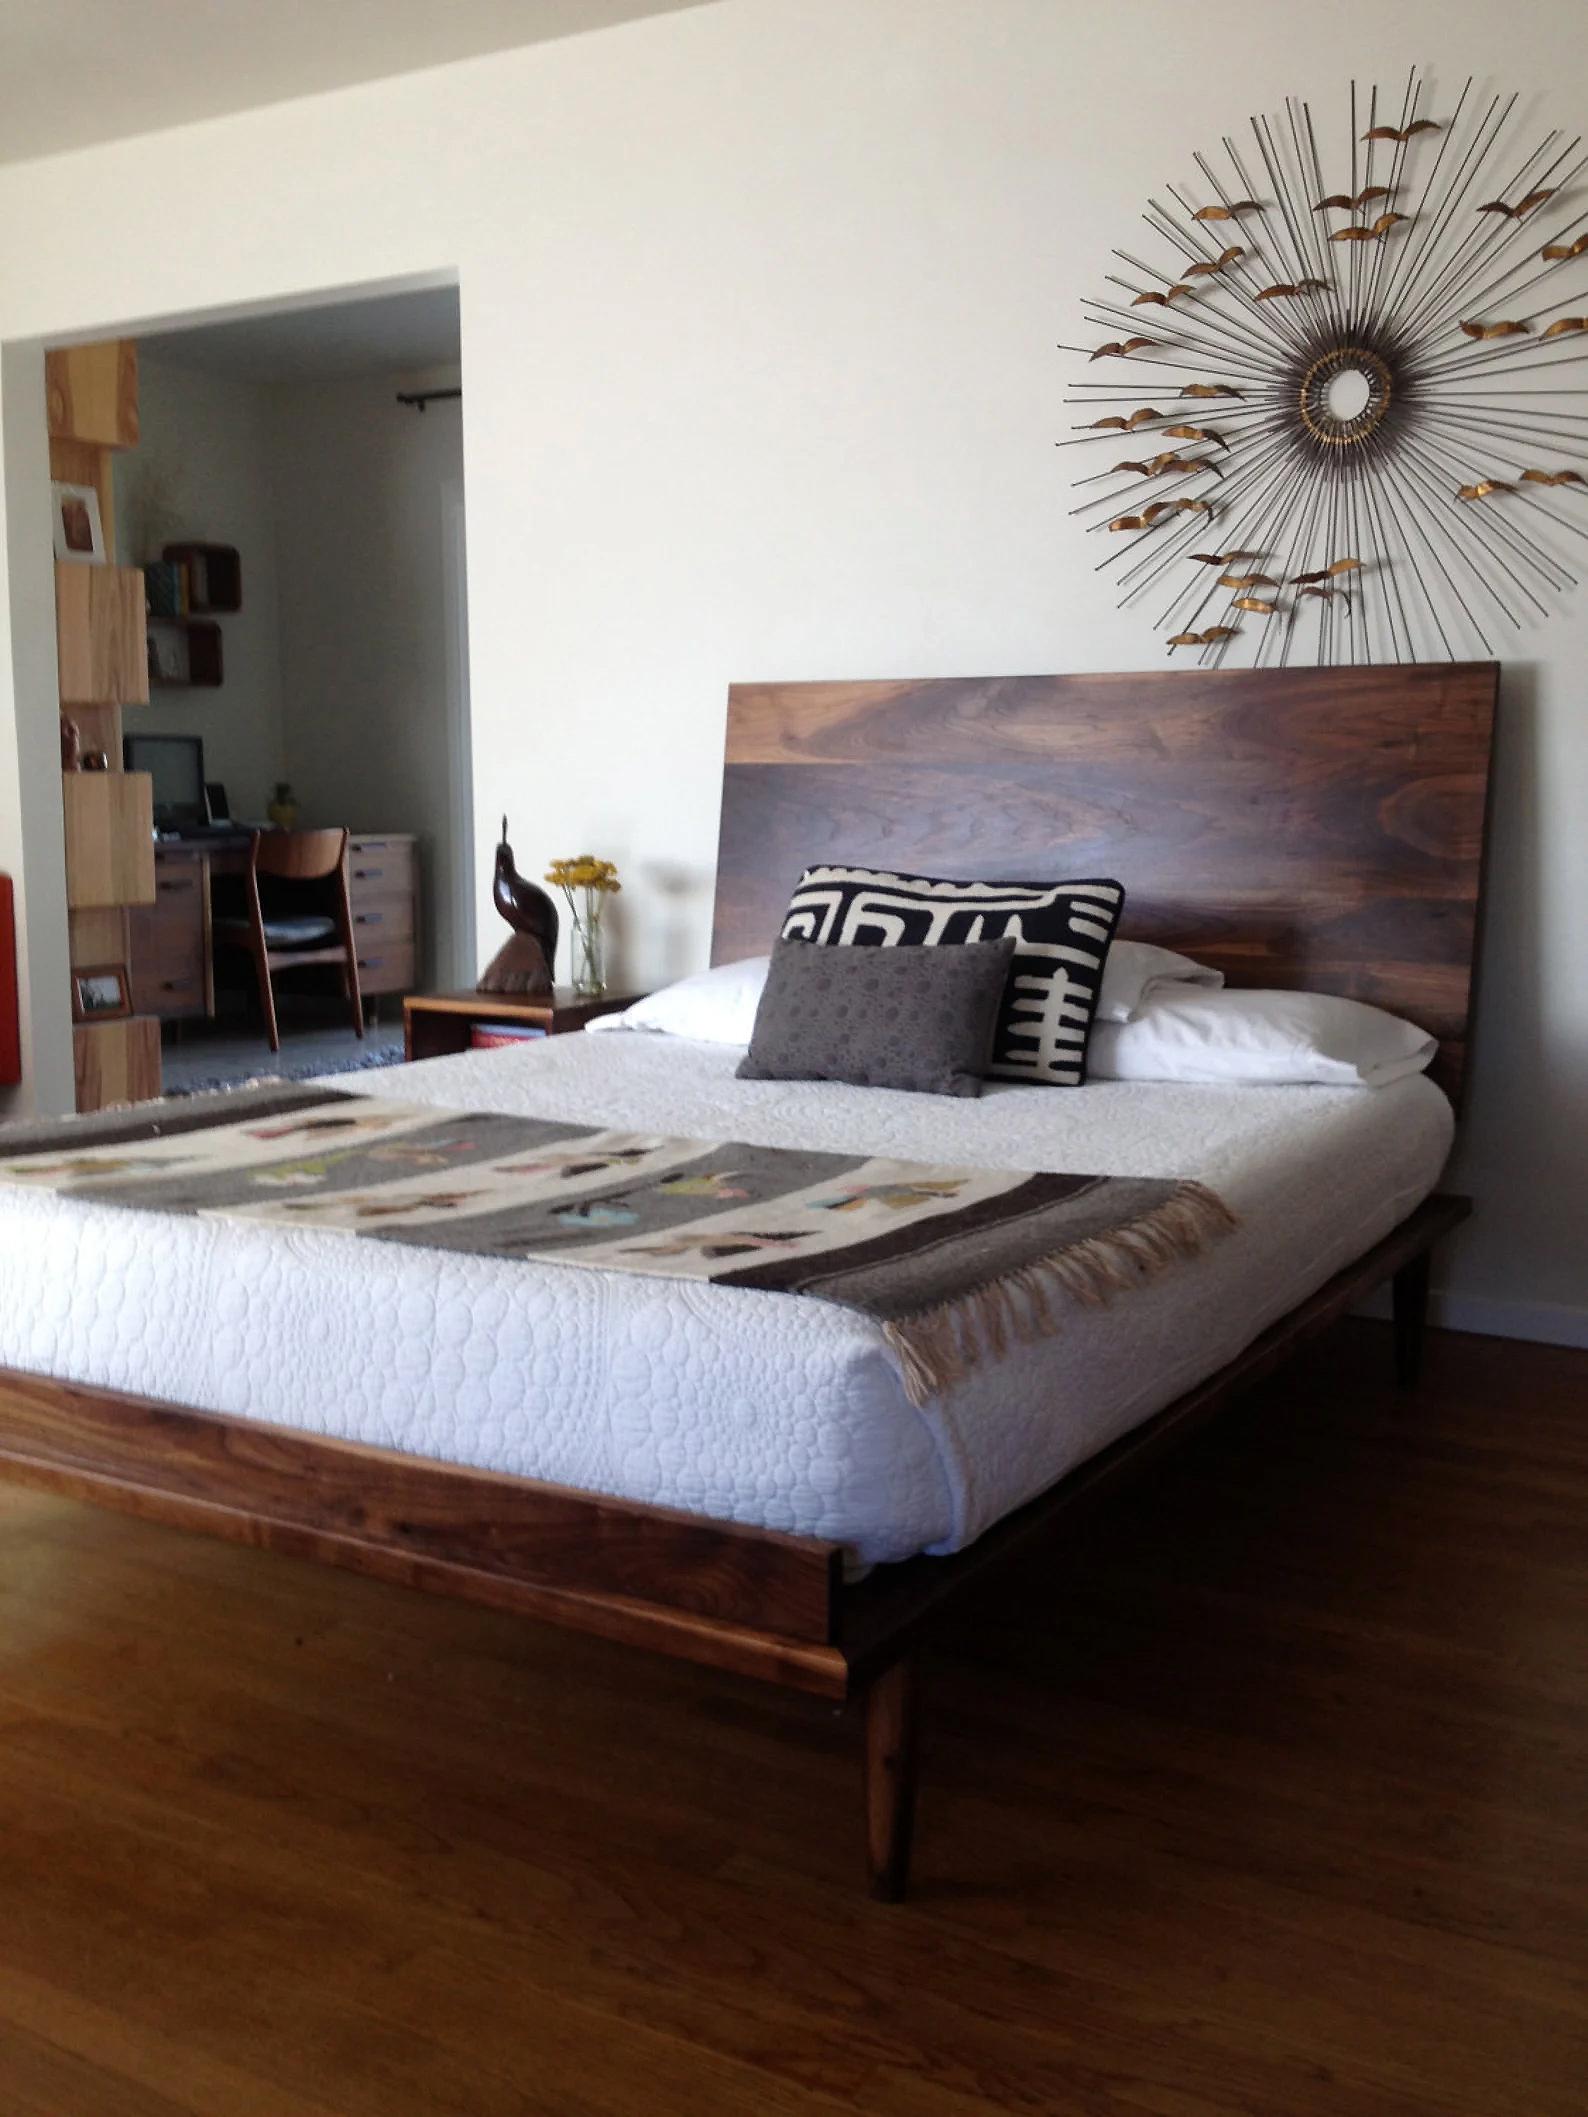 This bed is my own take on the iconic George Nelson Bed from the heyday of Mid Century Modern. It's built from solid walnut and consists of a thin platform resting on turned legs and a headboard supported by steel brackets. It has a hand-rubbed oil